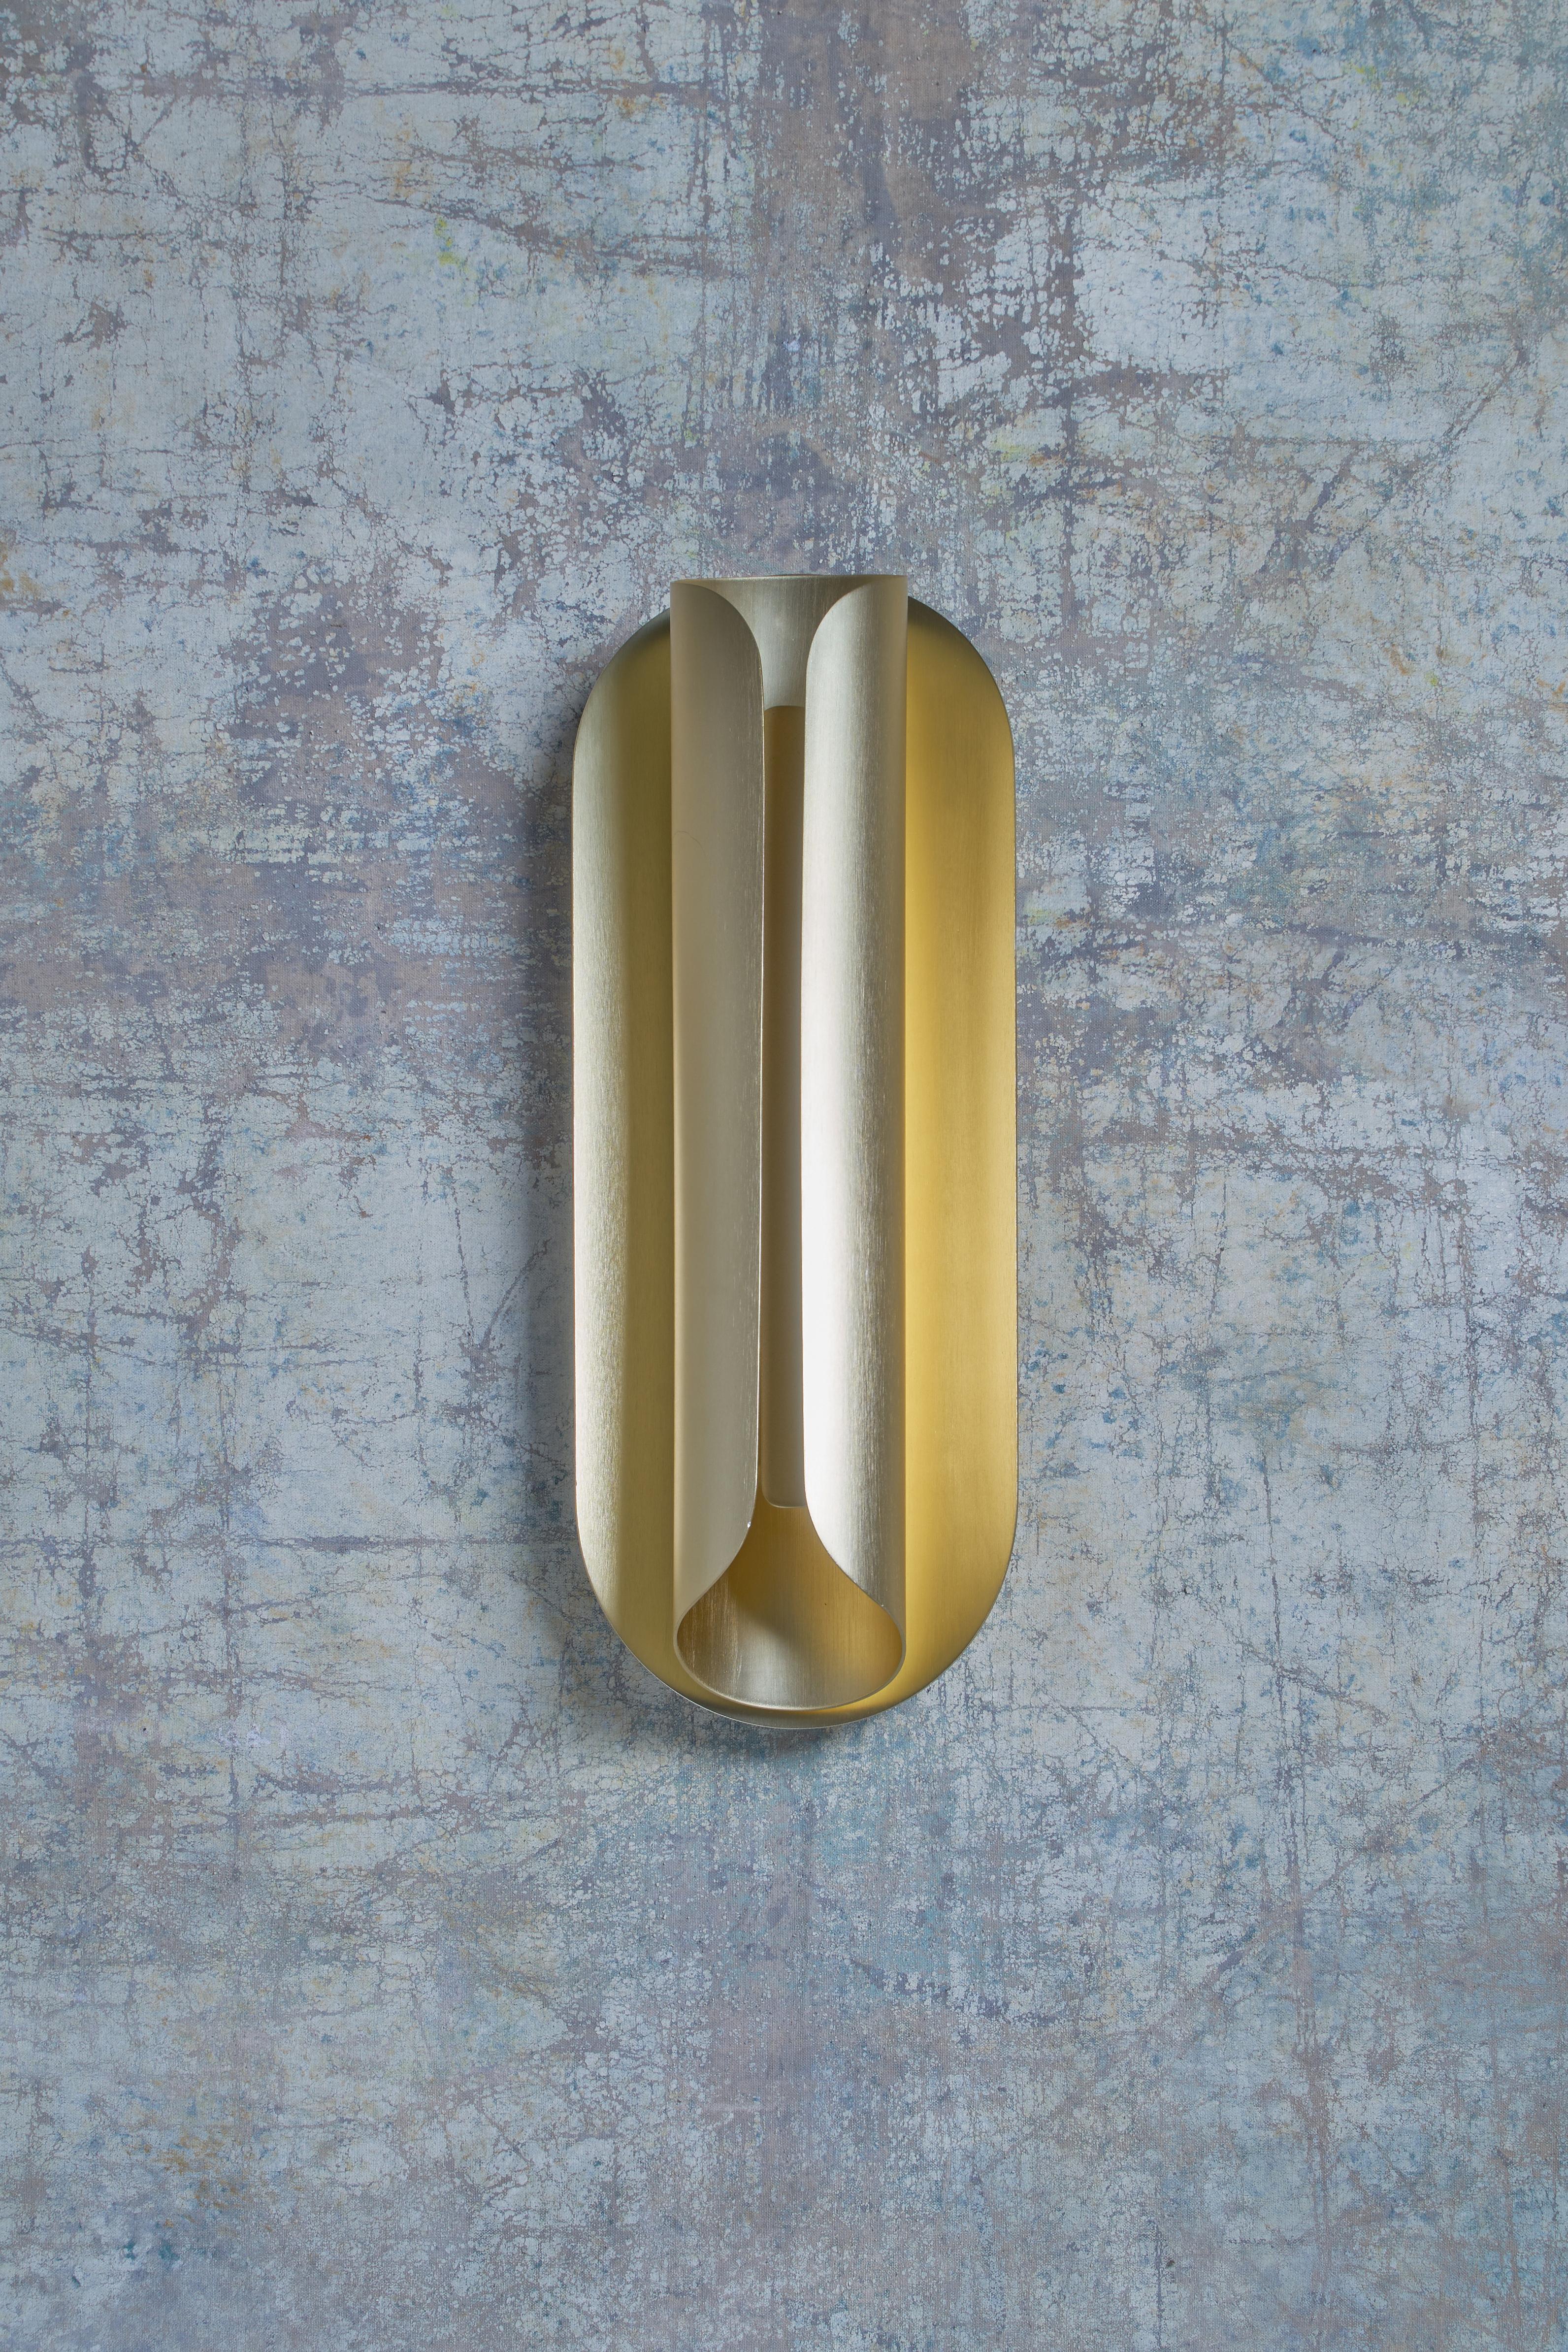 DCW Editions Rosalie Wall Lamp in Gold Aluminium by Julie Fuillet In New Condition For Sale In Brooklyn, NY